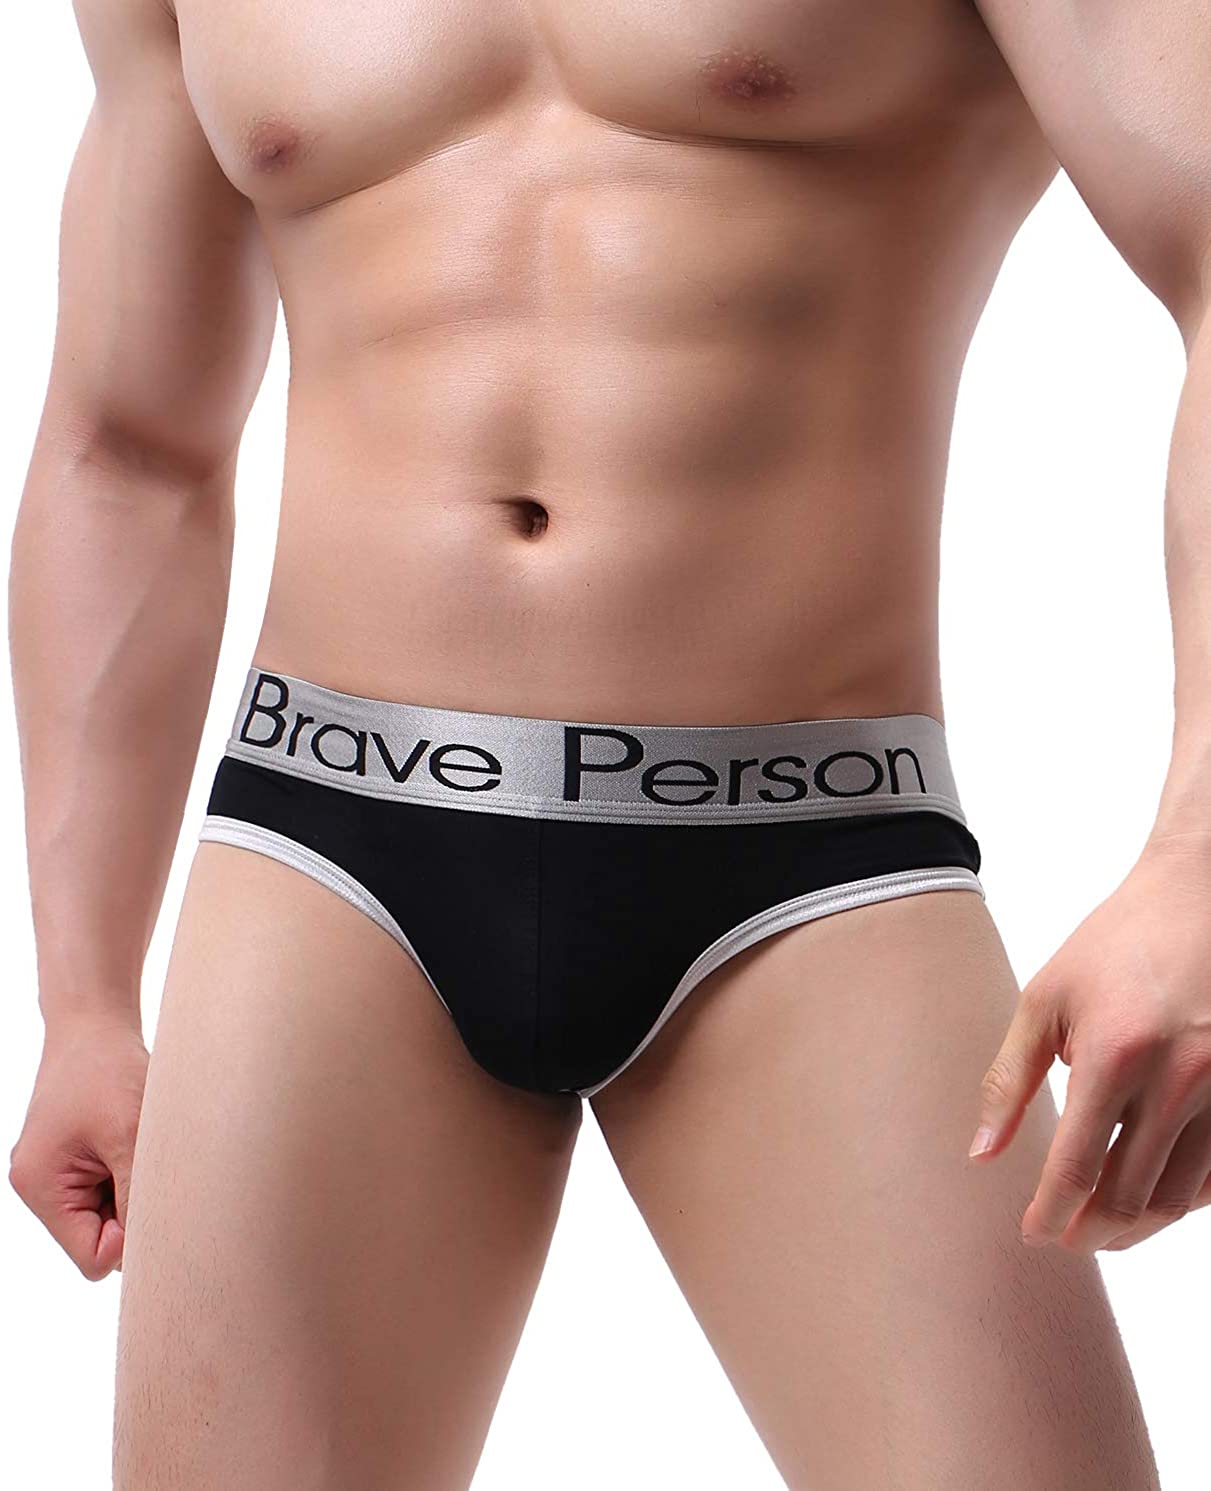 NEW Men’s Smooth Comfortable Underwear Thong G STRING briefs Size S-L 4 COLORS